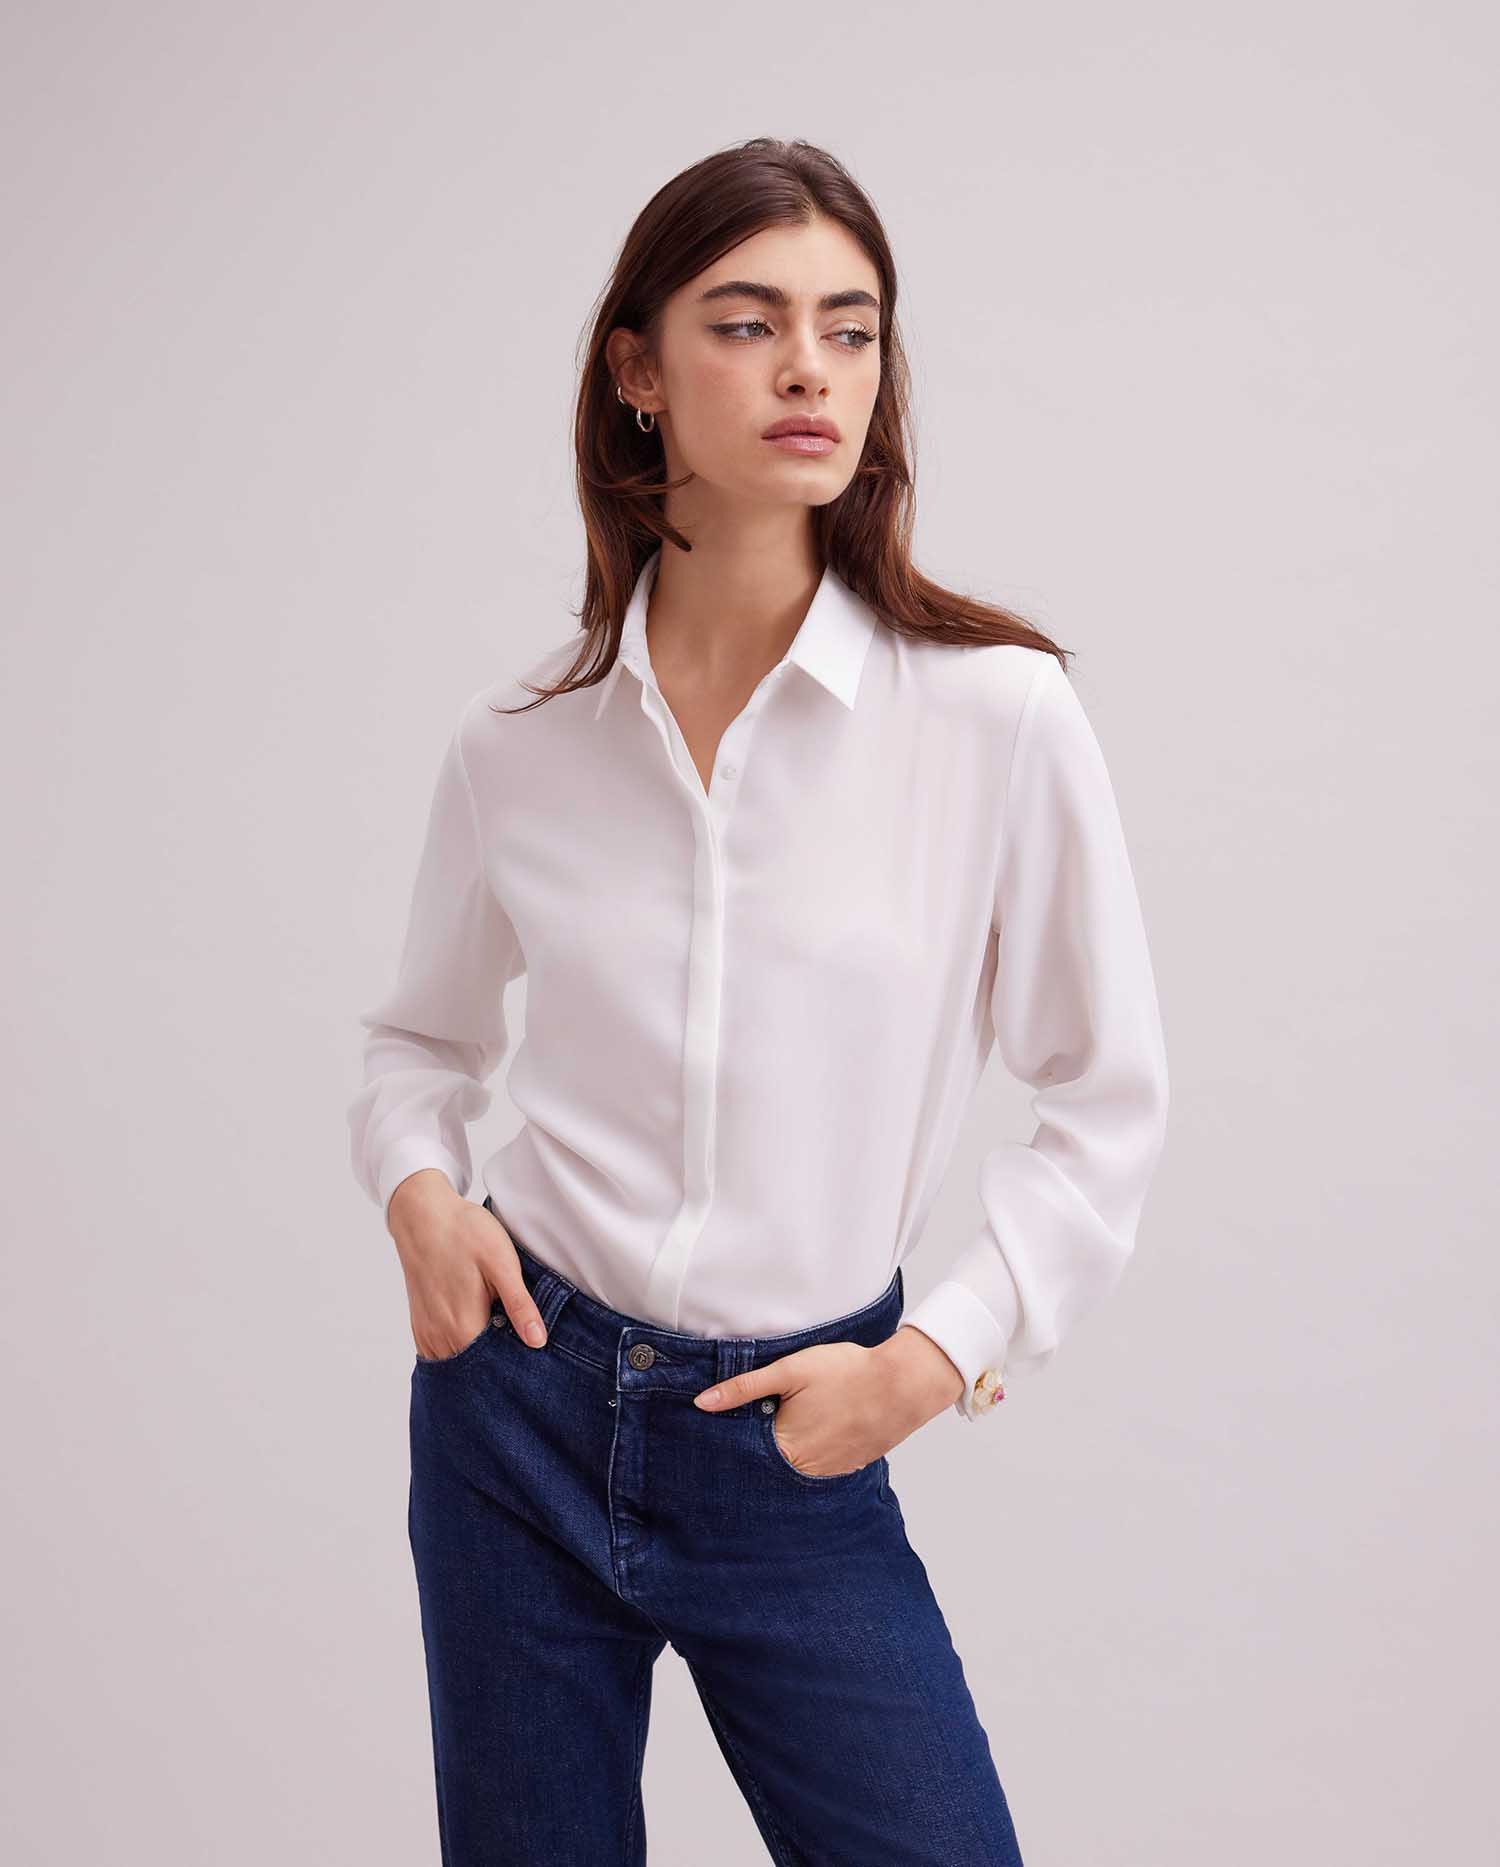 Discover the SAGANE Long sleeve crepe shirt with french cuffs from ANNE FONTAINE